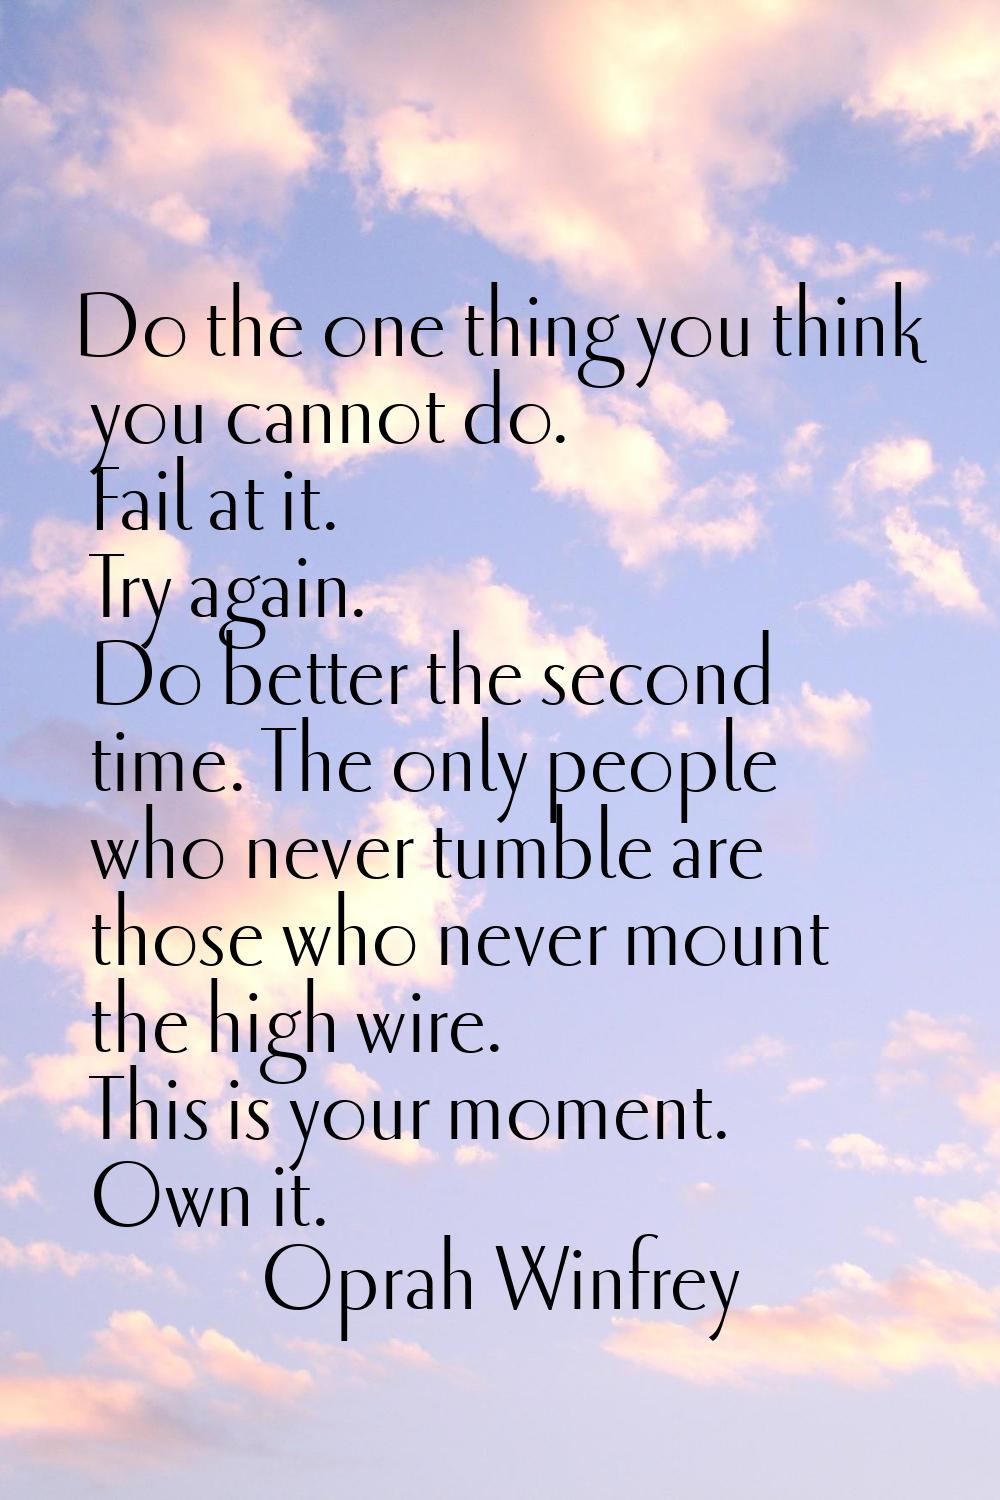 Do the one thing you think you cannot do. Fail at it. Try again. Do better the second time. The onl